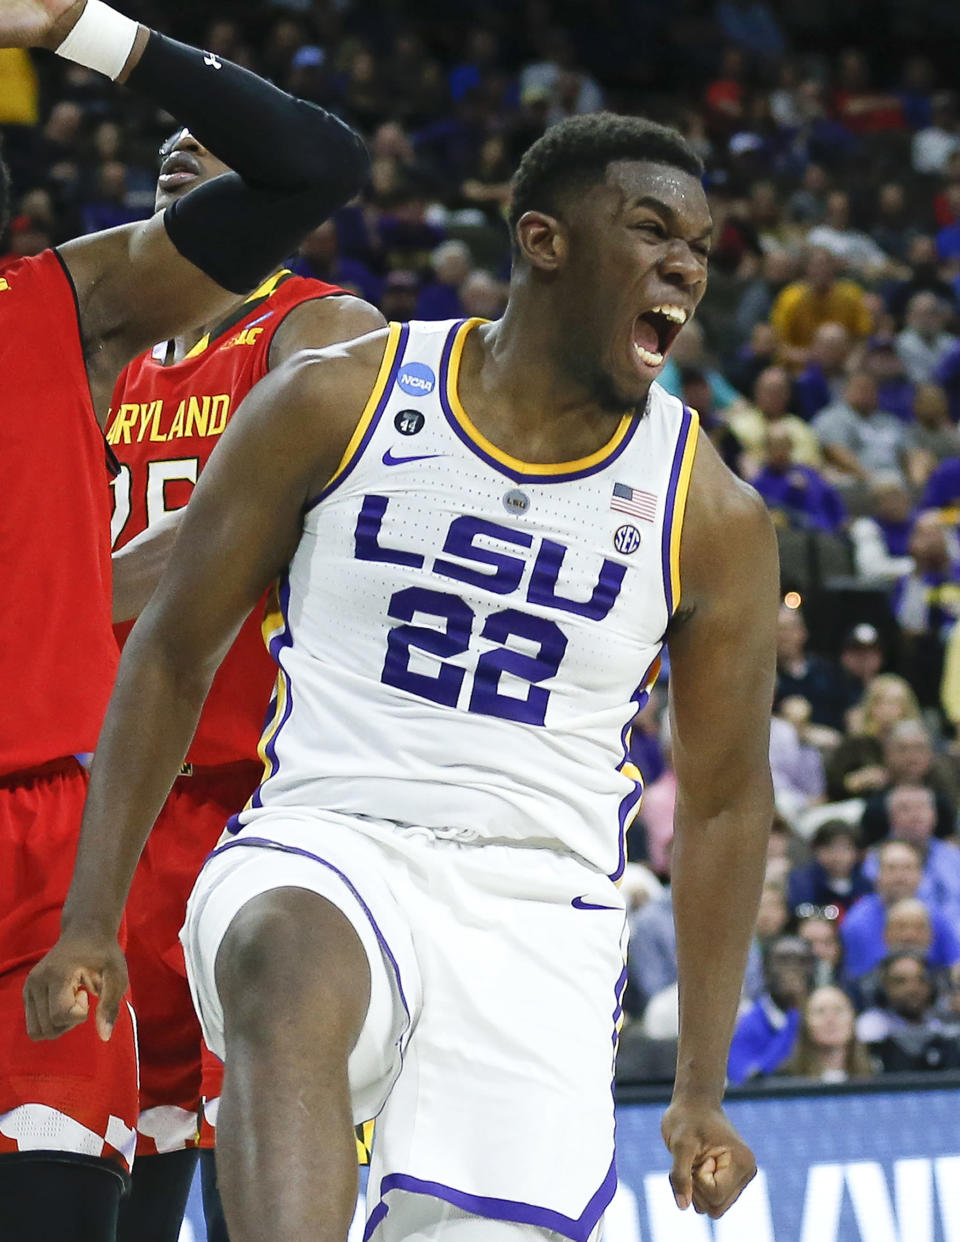 <p>LSU’s Darius Days (22) celebrates after sinking a shot against Maryland during the first half of a second-round game in the NCAA men’s college basketball tournament in Jacksonville, Fla., Saturday, March 23, 2019. (AP Photo/Stephen B. Morton) </p>